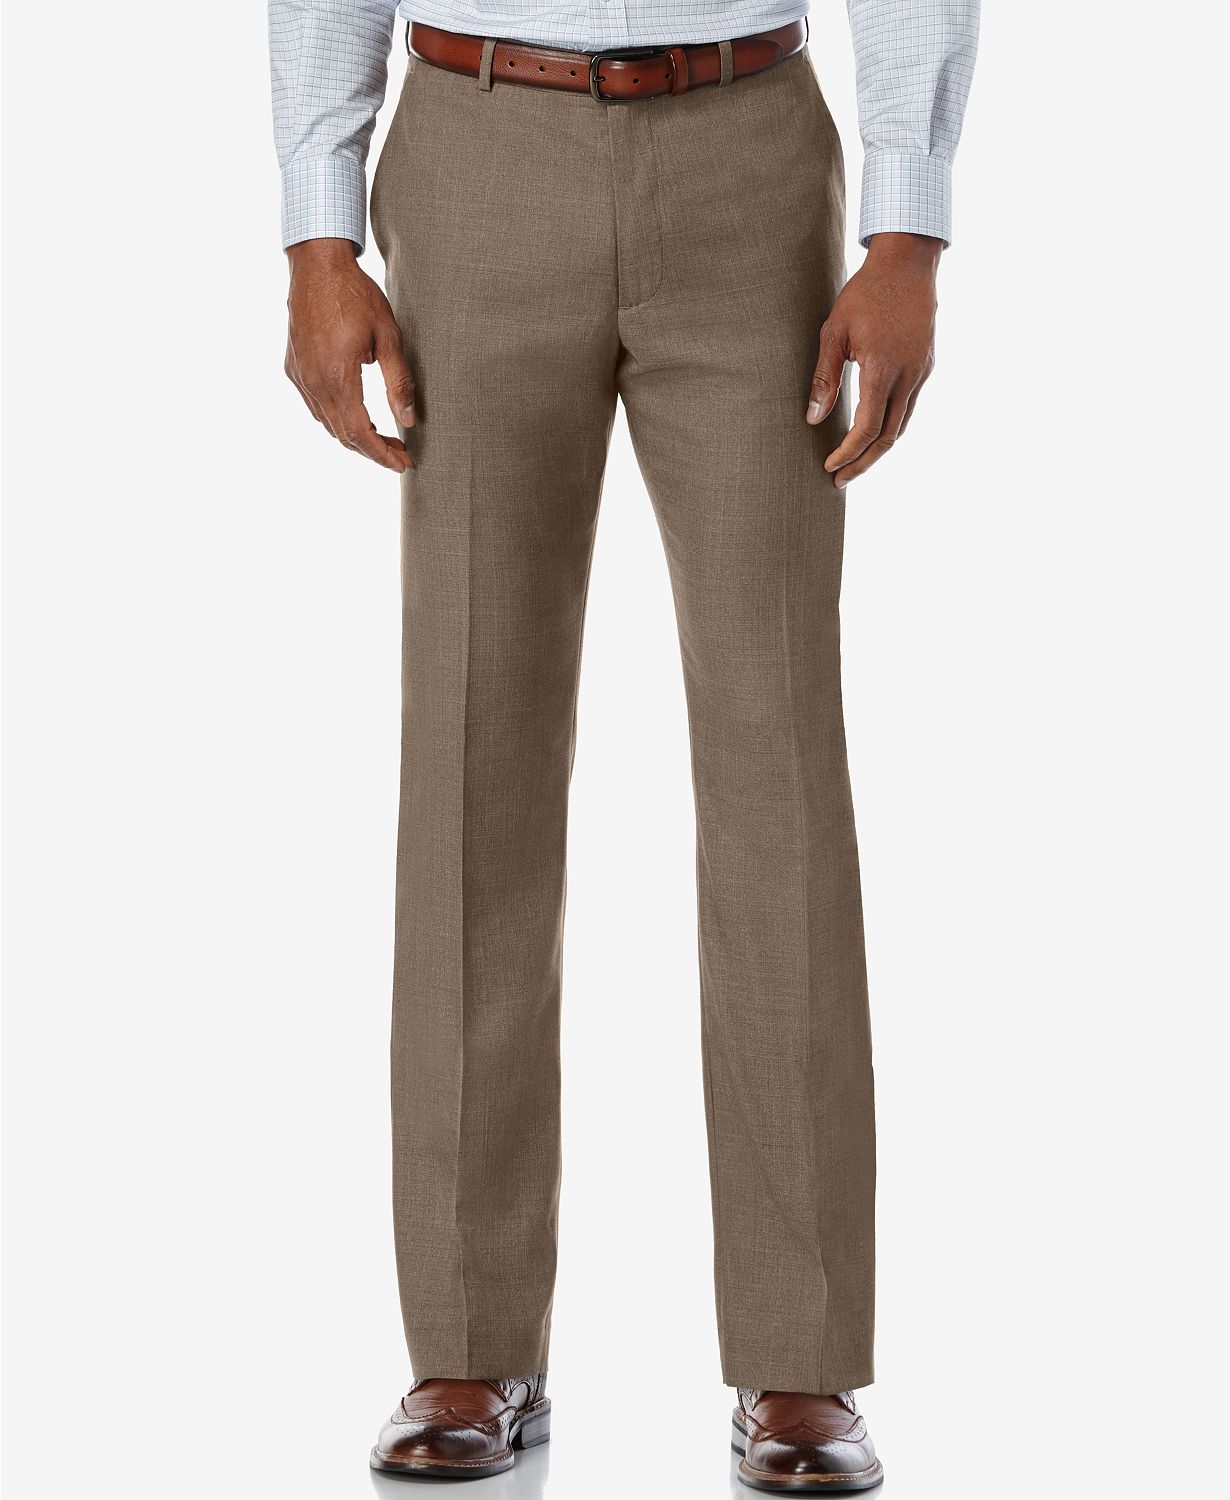 Perry Ellis Slim Fit Travel Luxe Flat Front Dress Pant in Chinchilla Brown